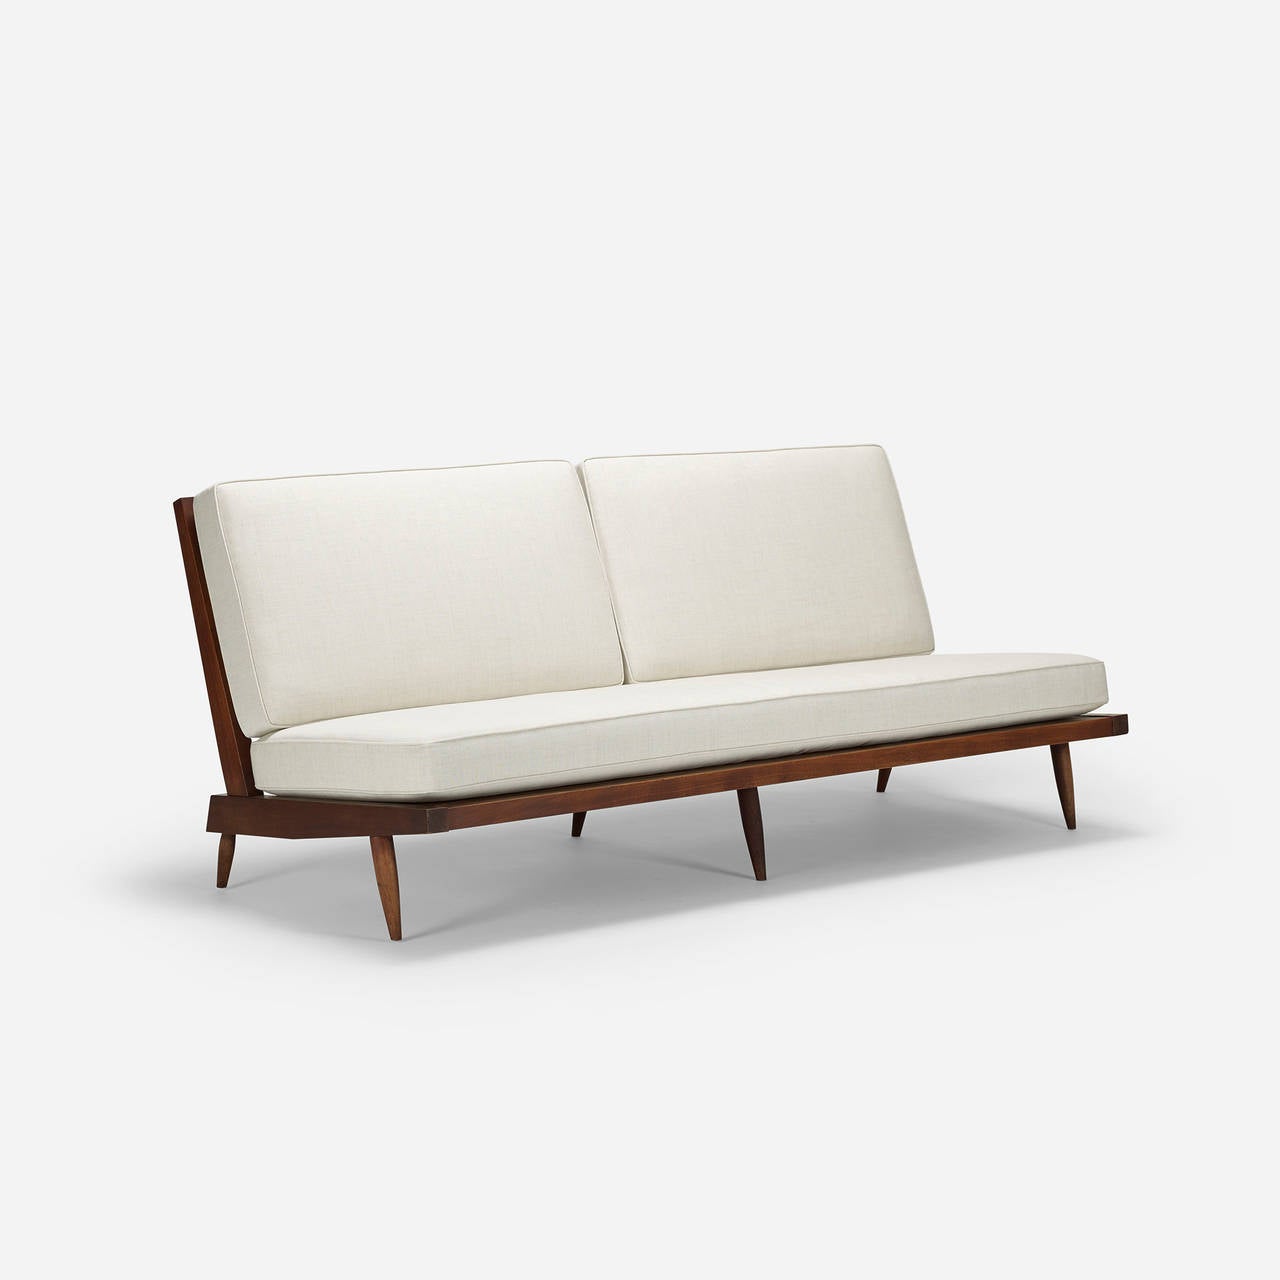 Settee by George Nakashima. Sold with a letter of authentication issued by Mira Nakashima.